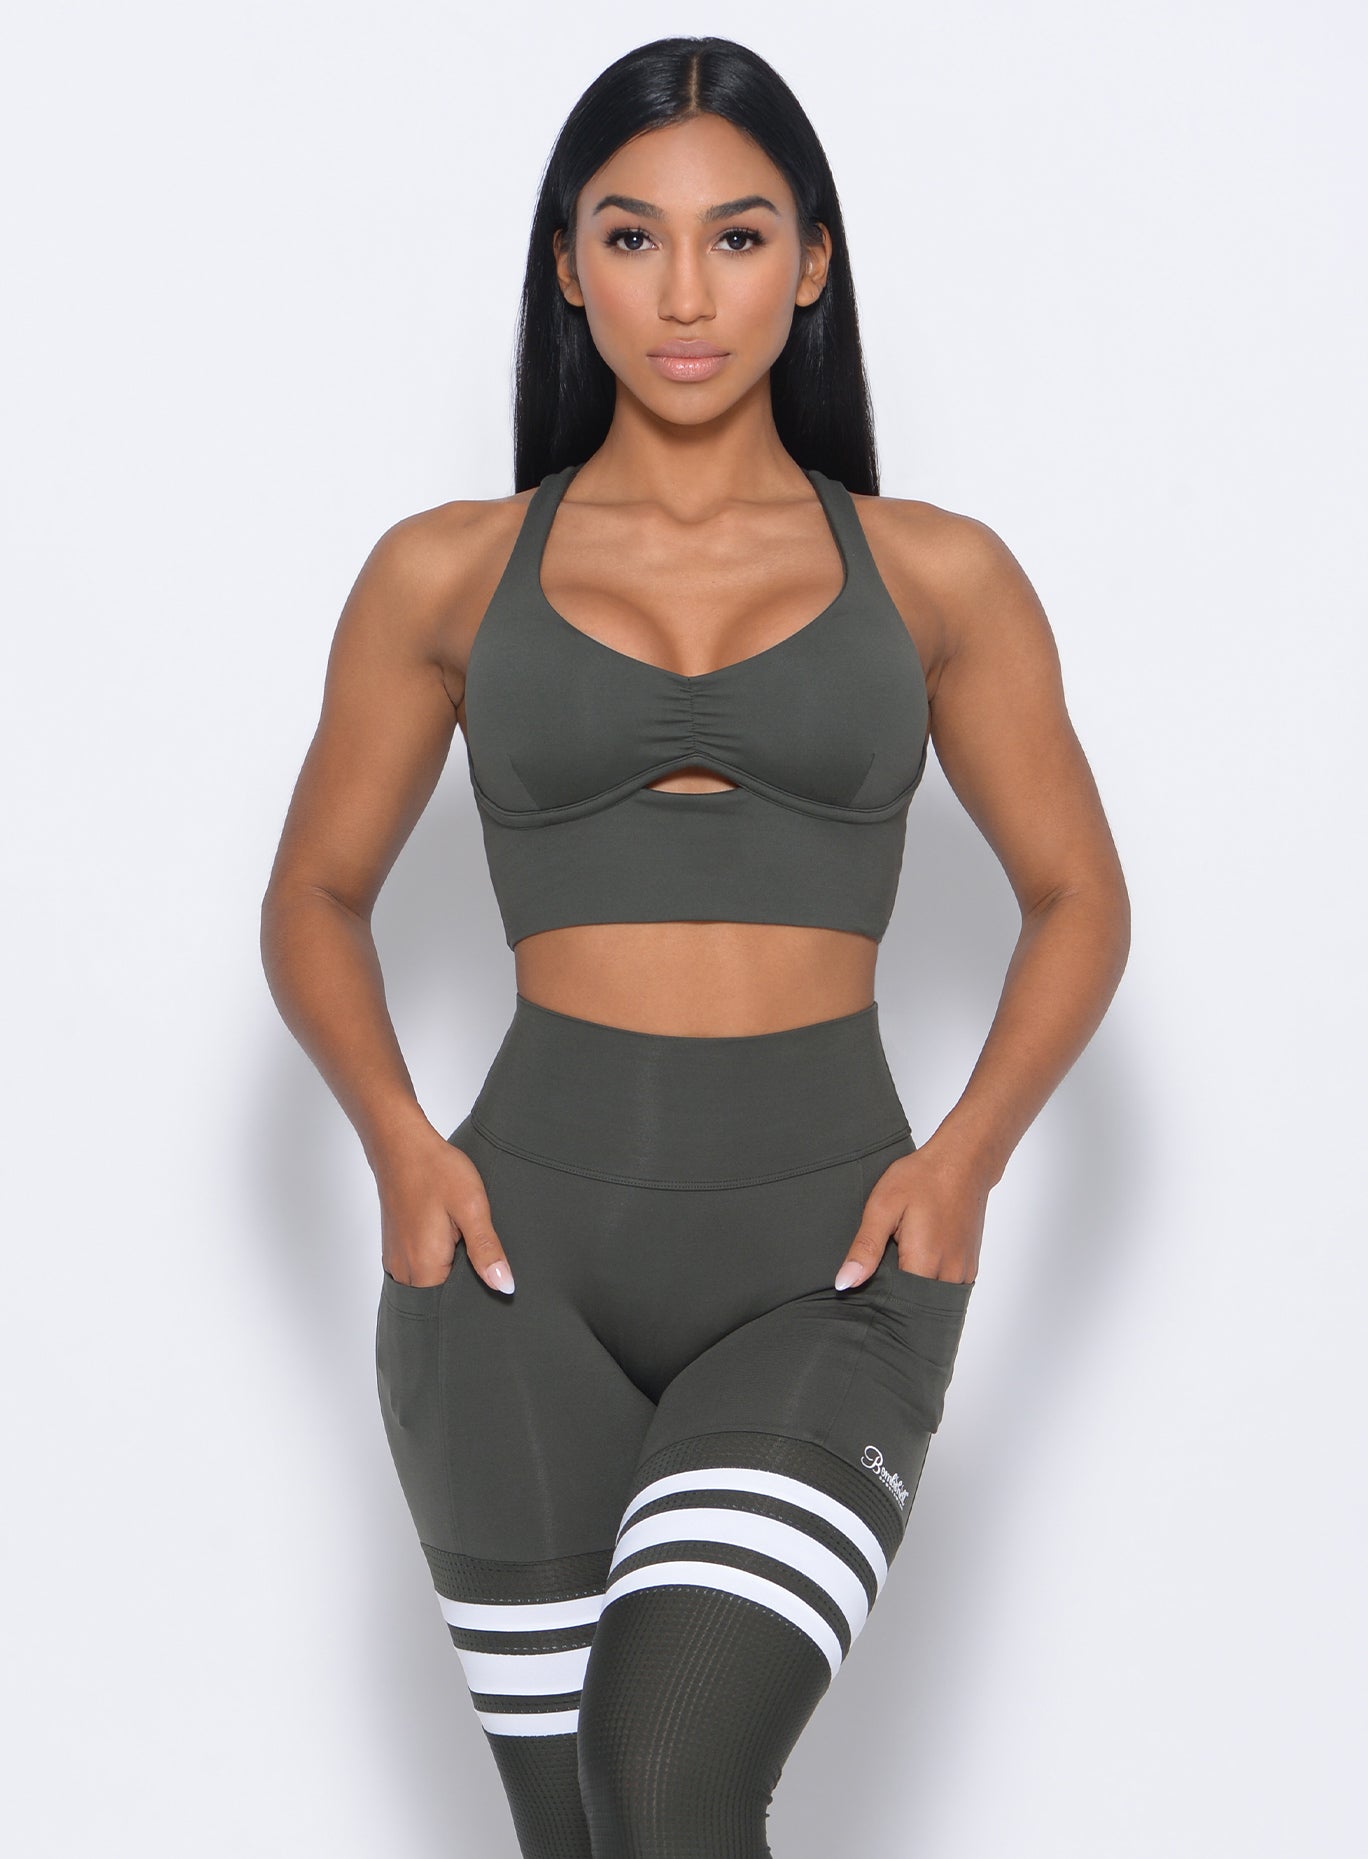 Front profile view of the model wearing our keyhole bralette in hunter green color and a matching leggings